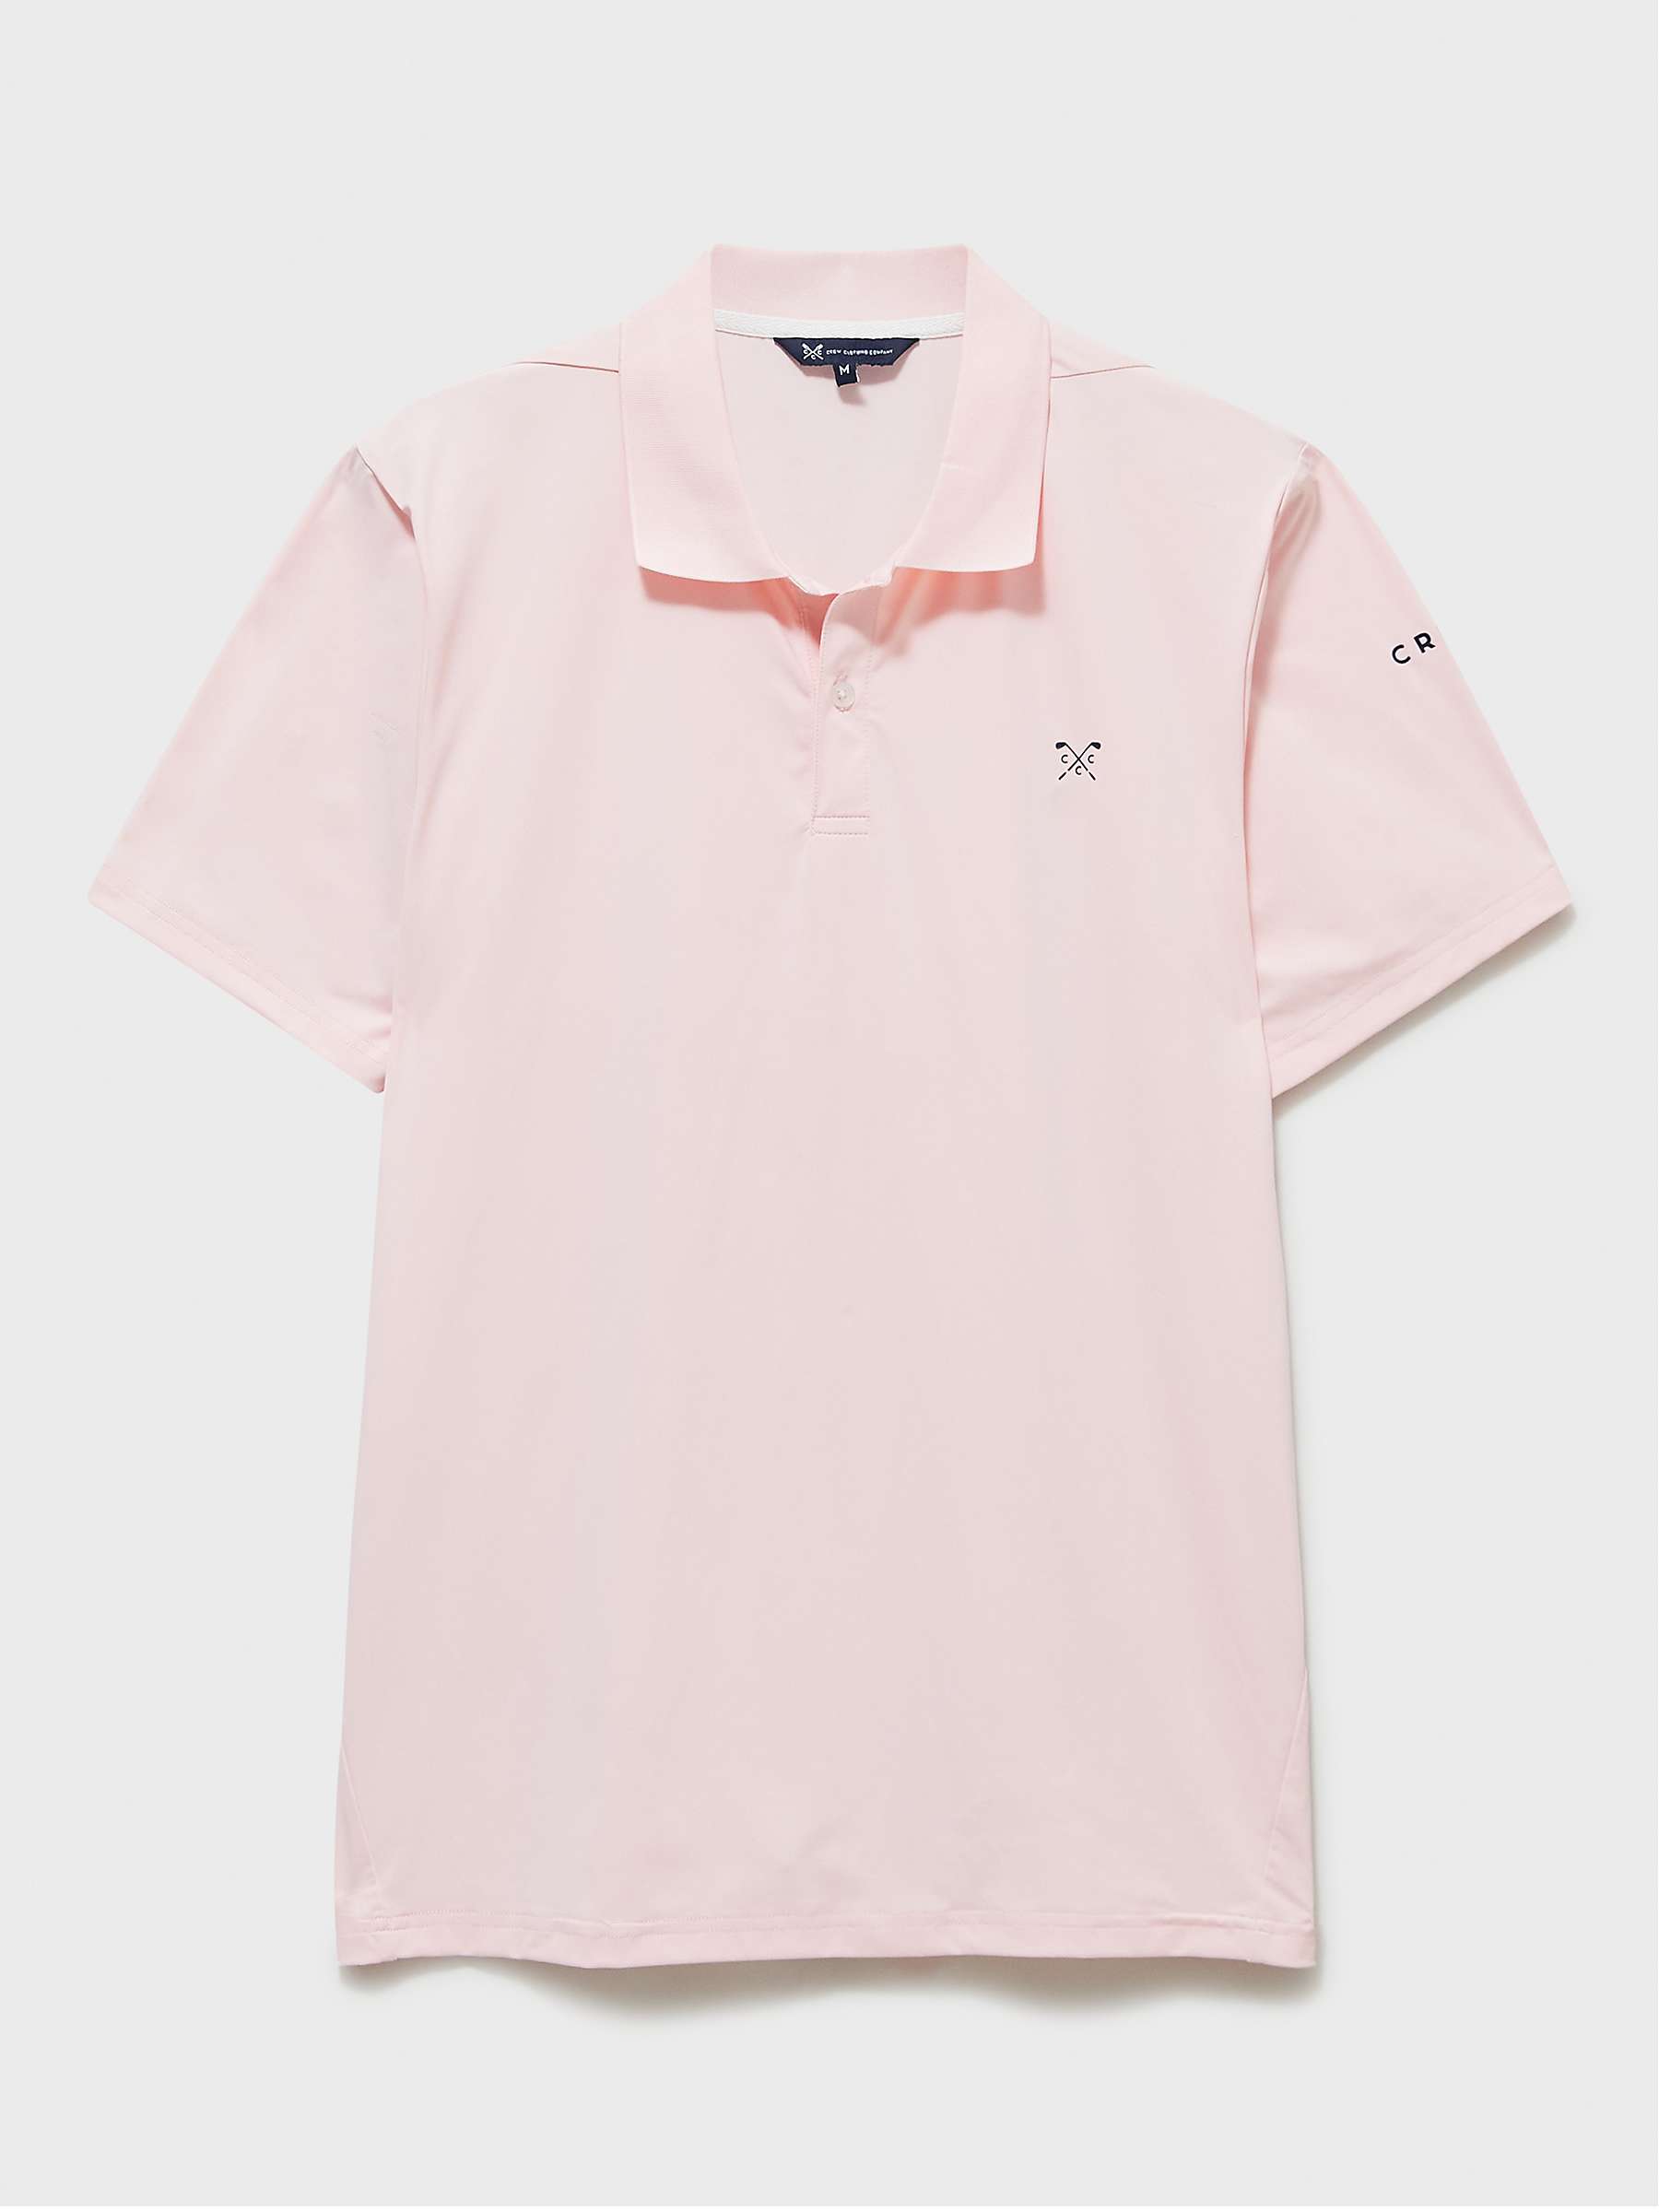 Buy Crew Clothing Smart Golf Polo Shirt Online at johnlewis.com